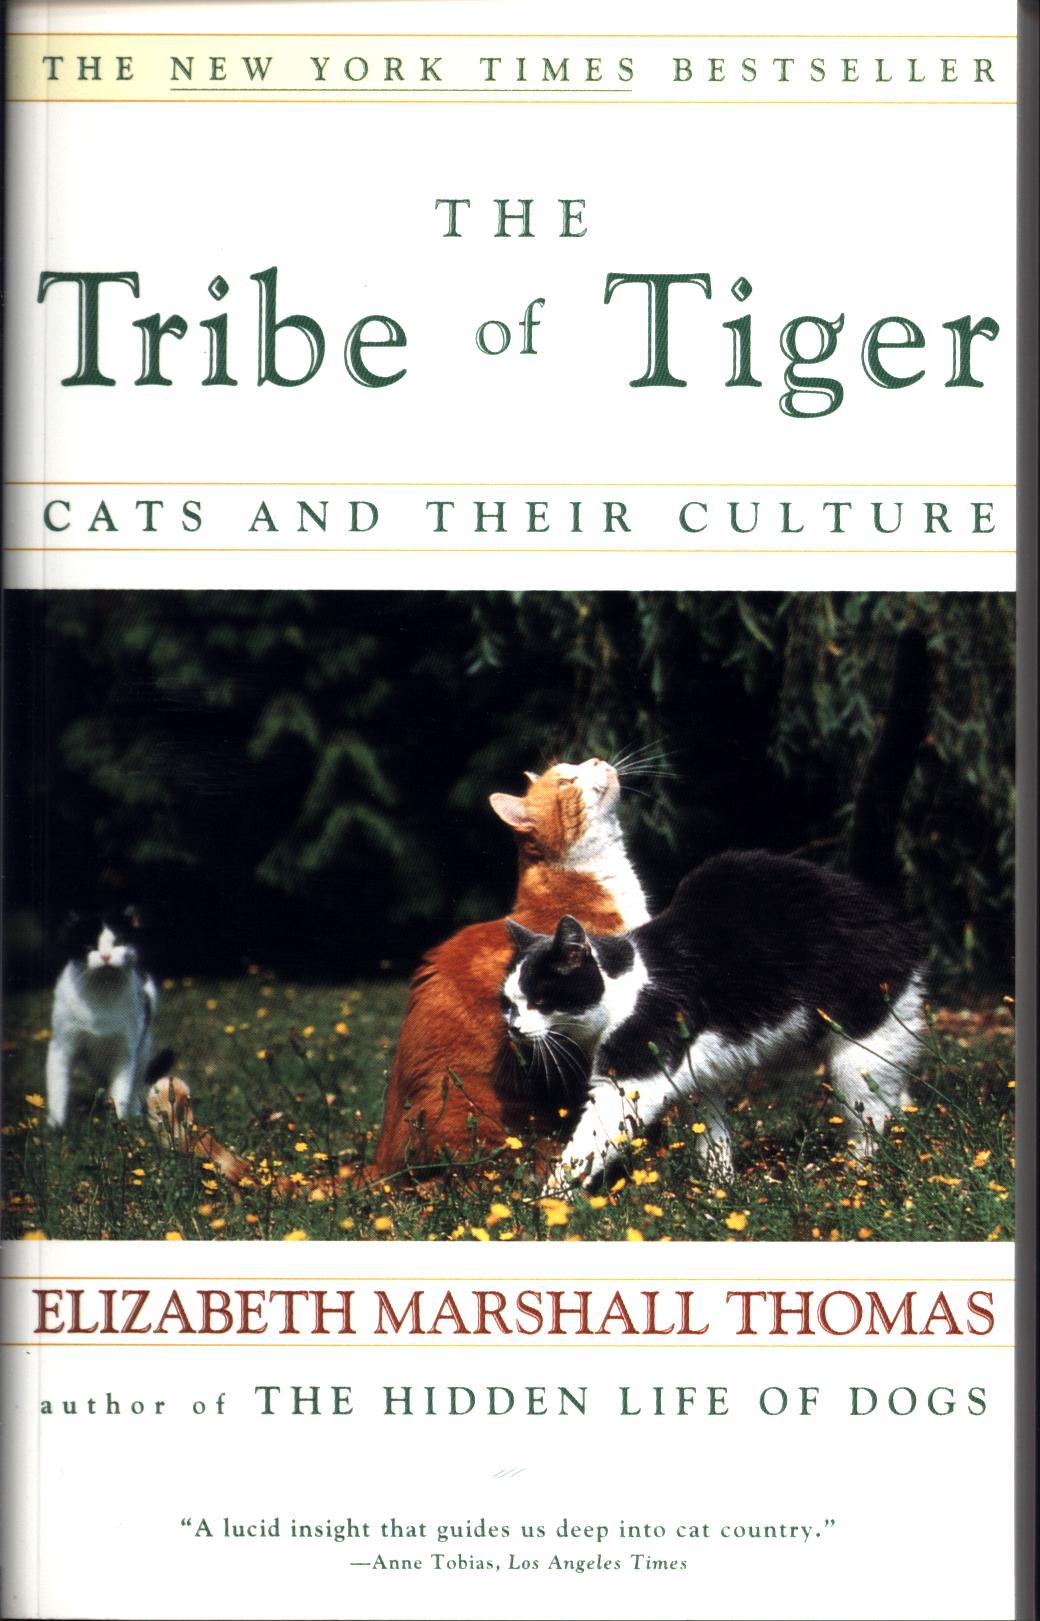 THE TRIBE OF THE TIGER: cats and their culture